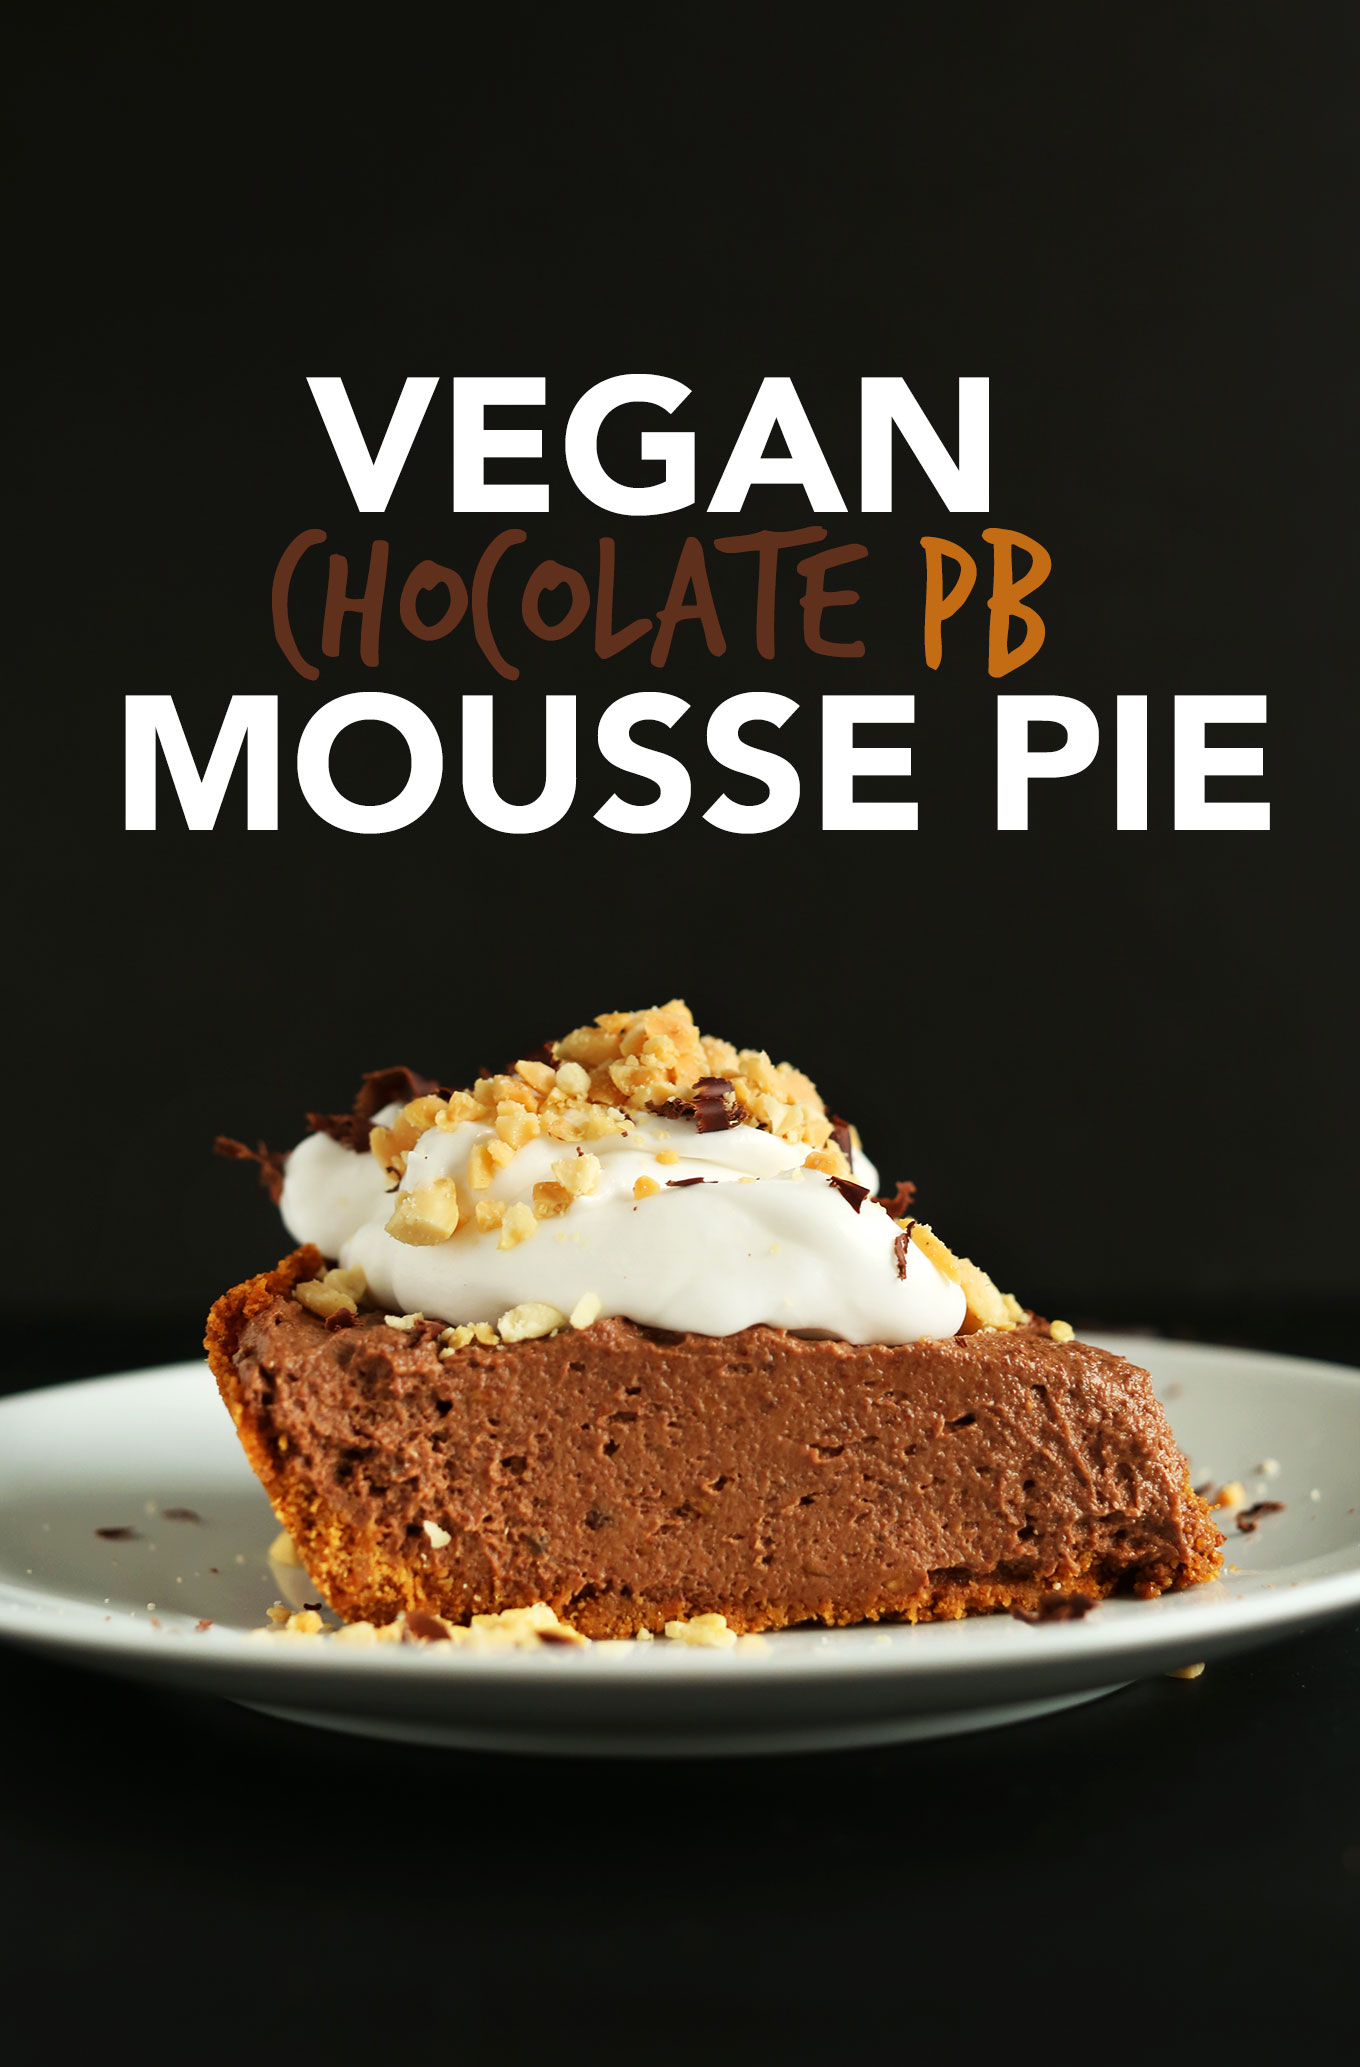 Slice of Vegan Chocolate PB Mousse Pie with coconut whipped cream